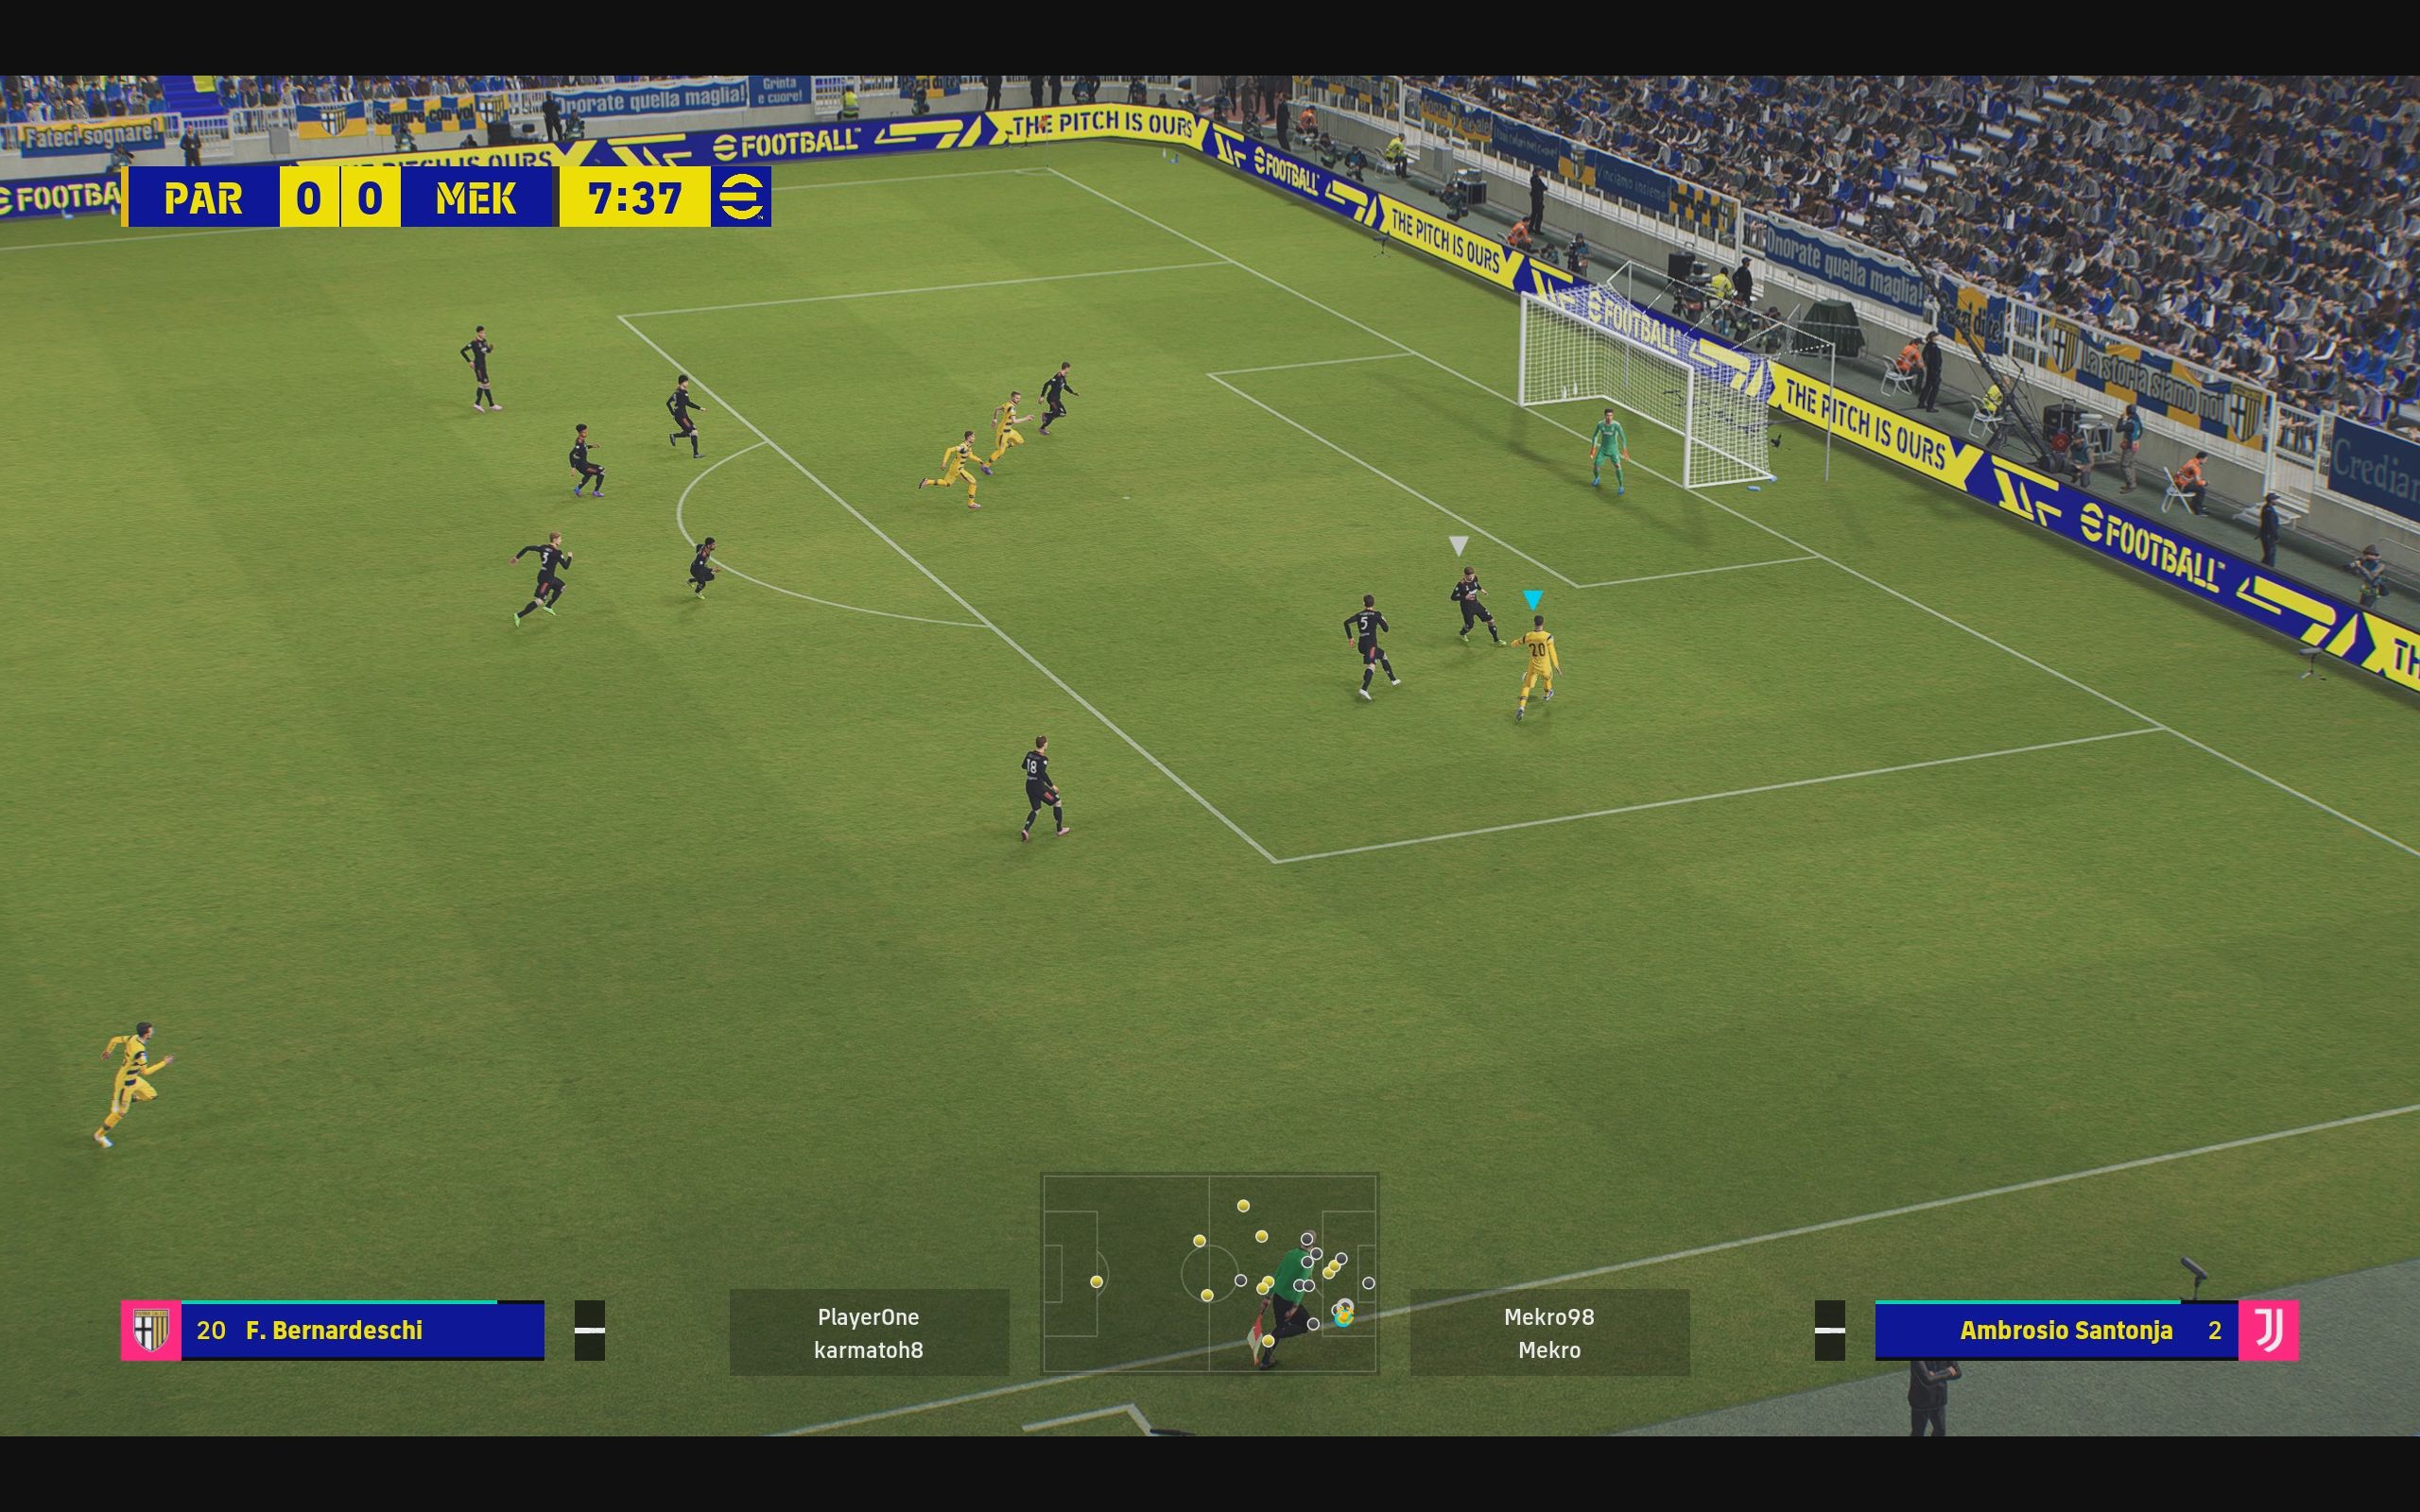 eFootball review: Screenshot from a match of an all-yellow team entering the opposition's penalty area while attacking an all-black team.